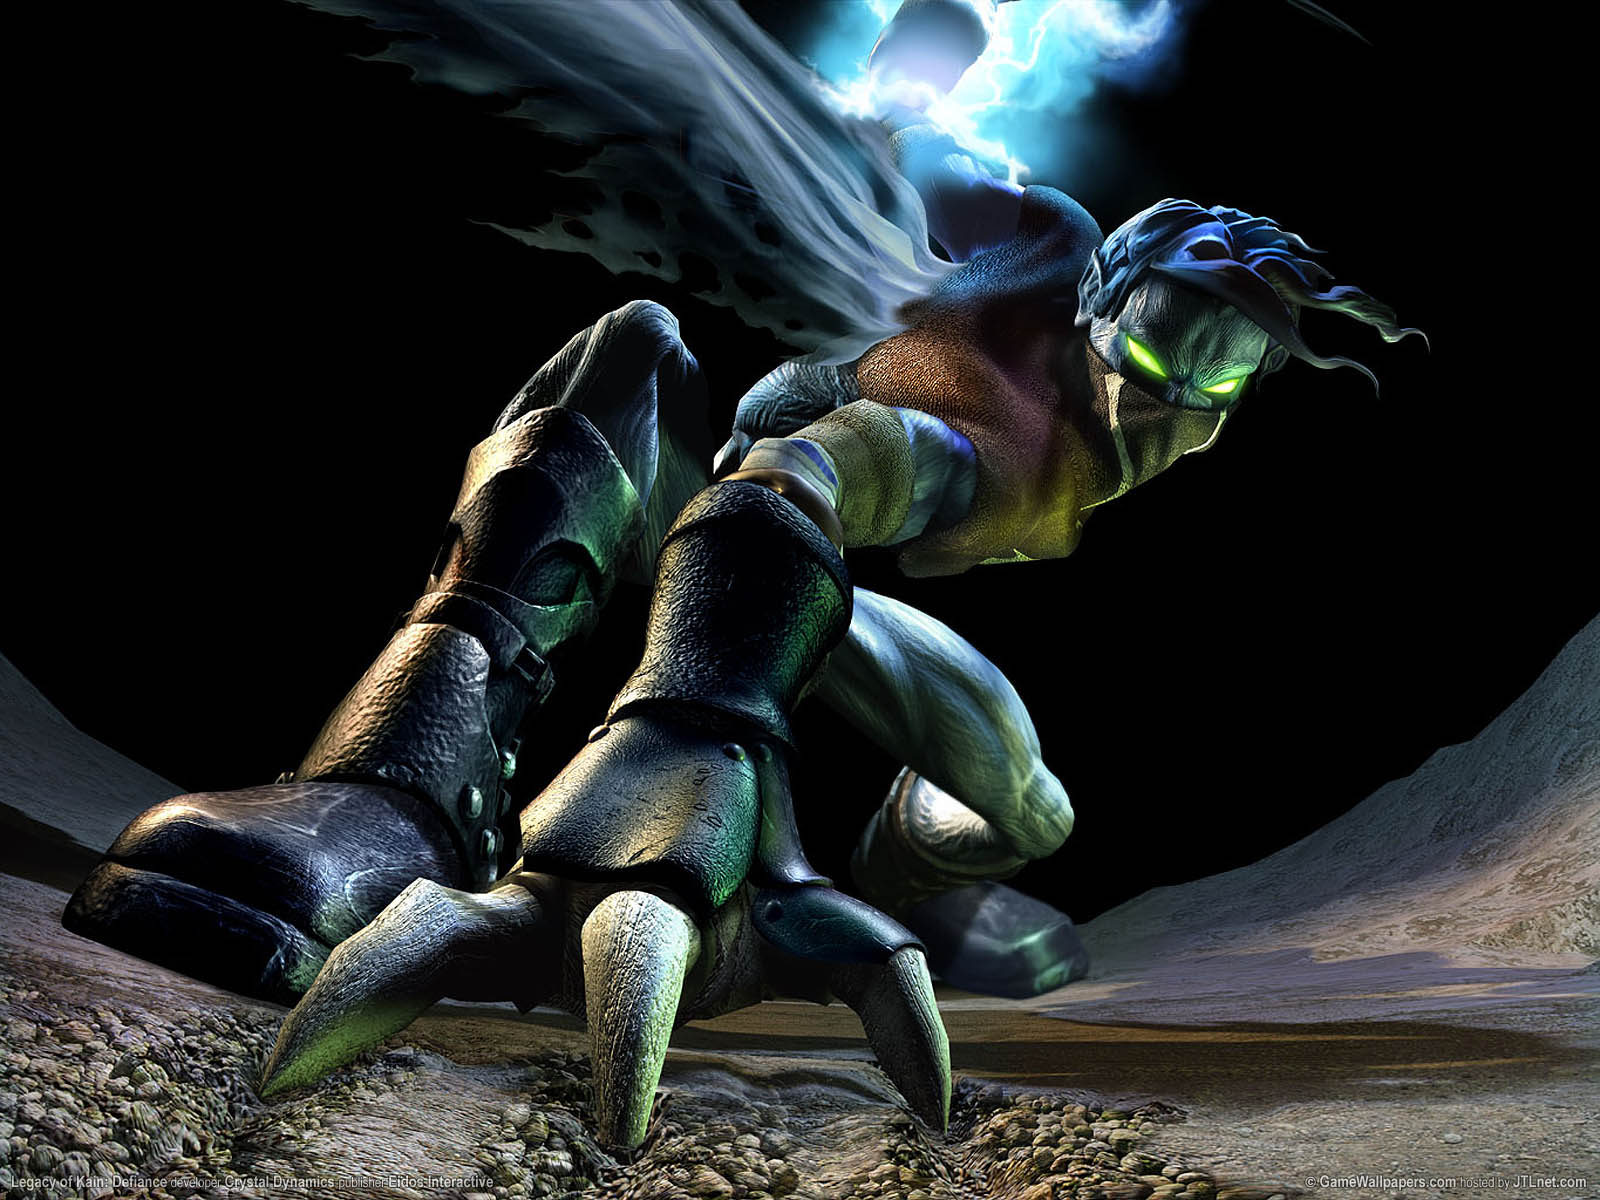 Legacy of Kain%2525253A Defiance achtergrond 03 1600x1200